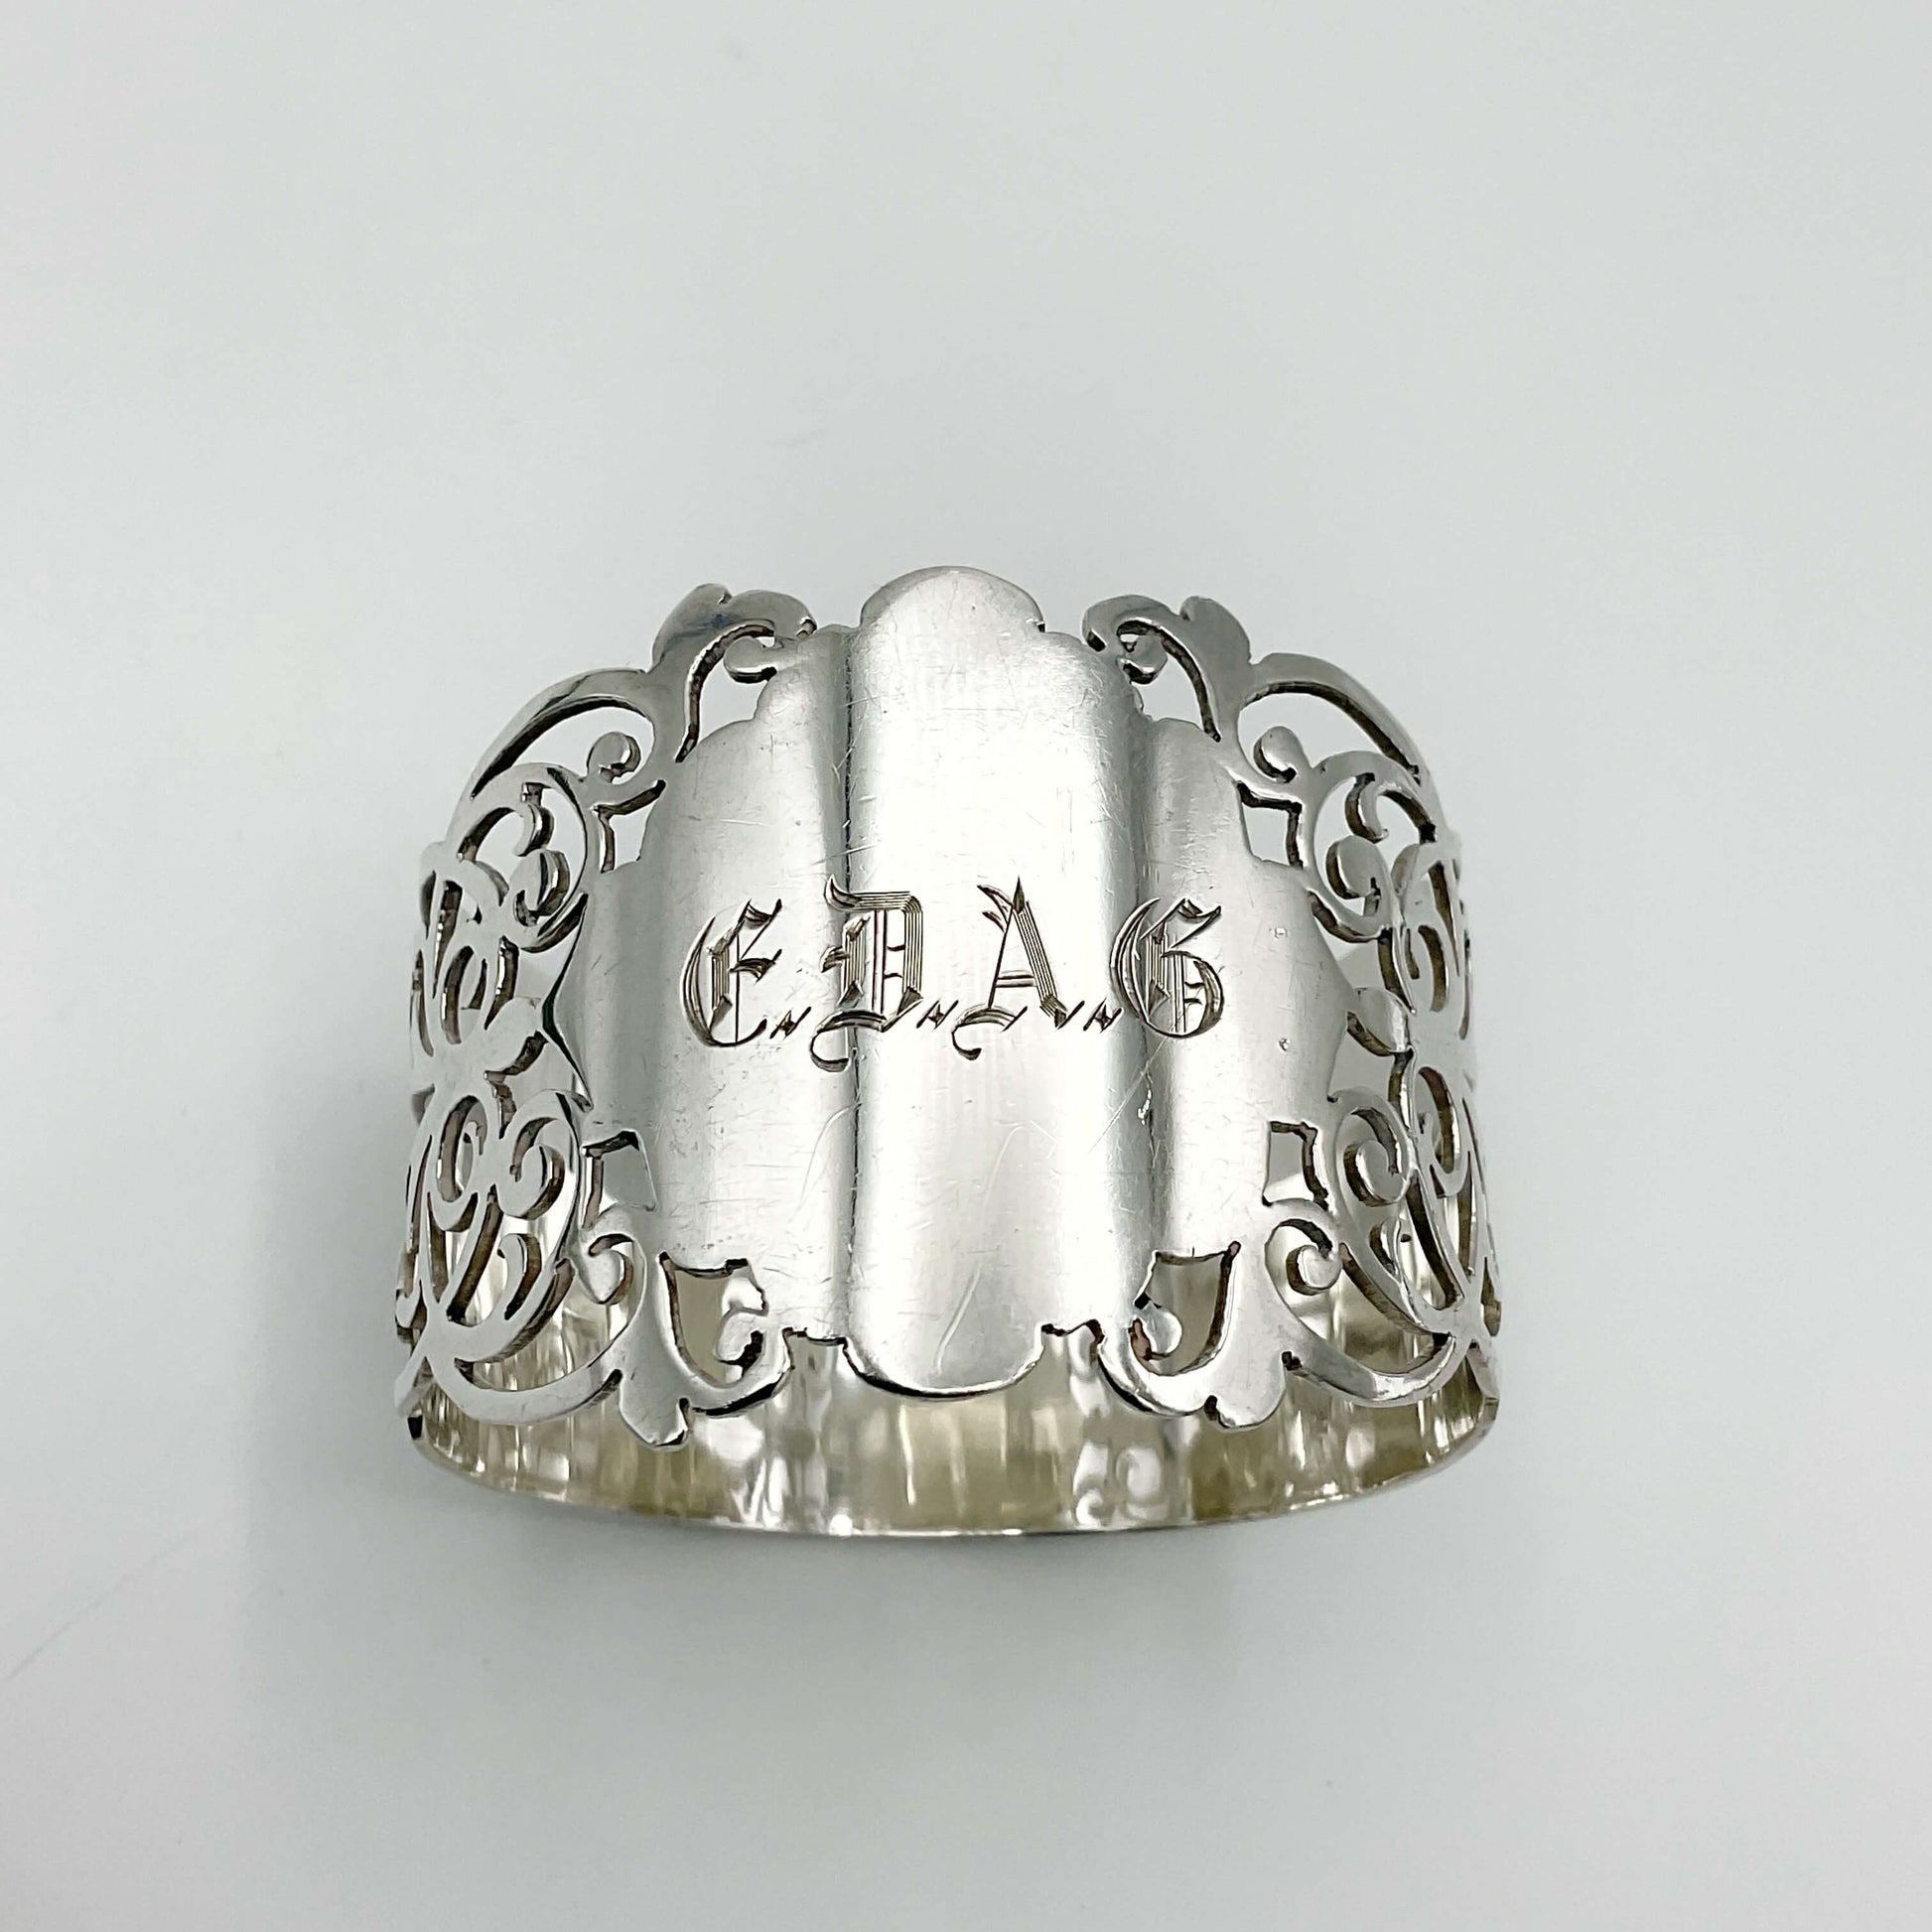 Shiny napkin ring with elaborate sides and EDAG in the centre on a plain background 